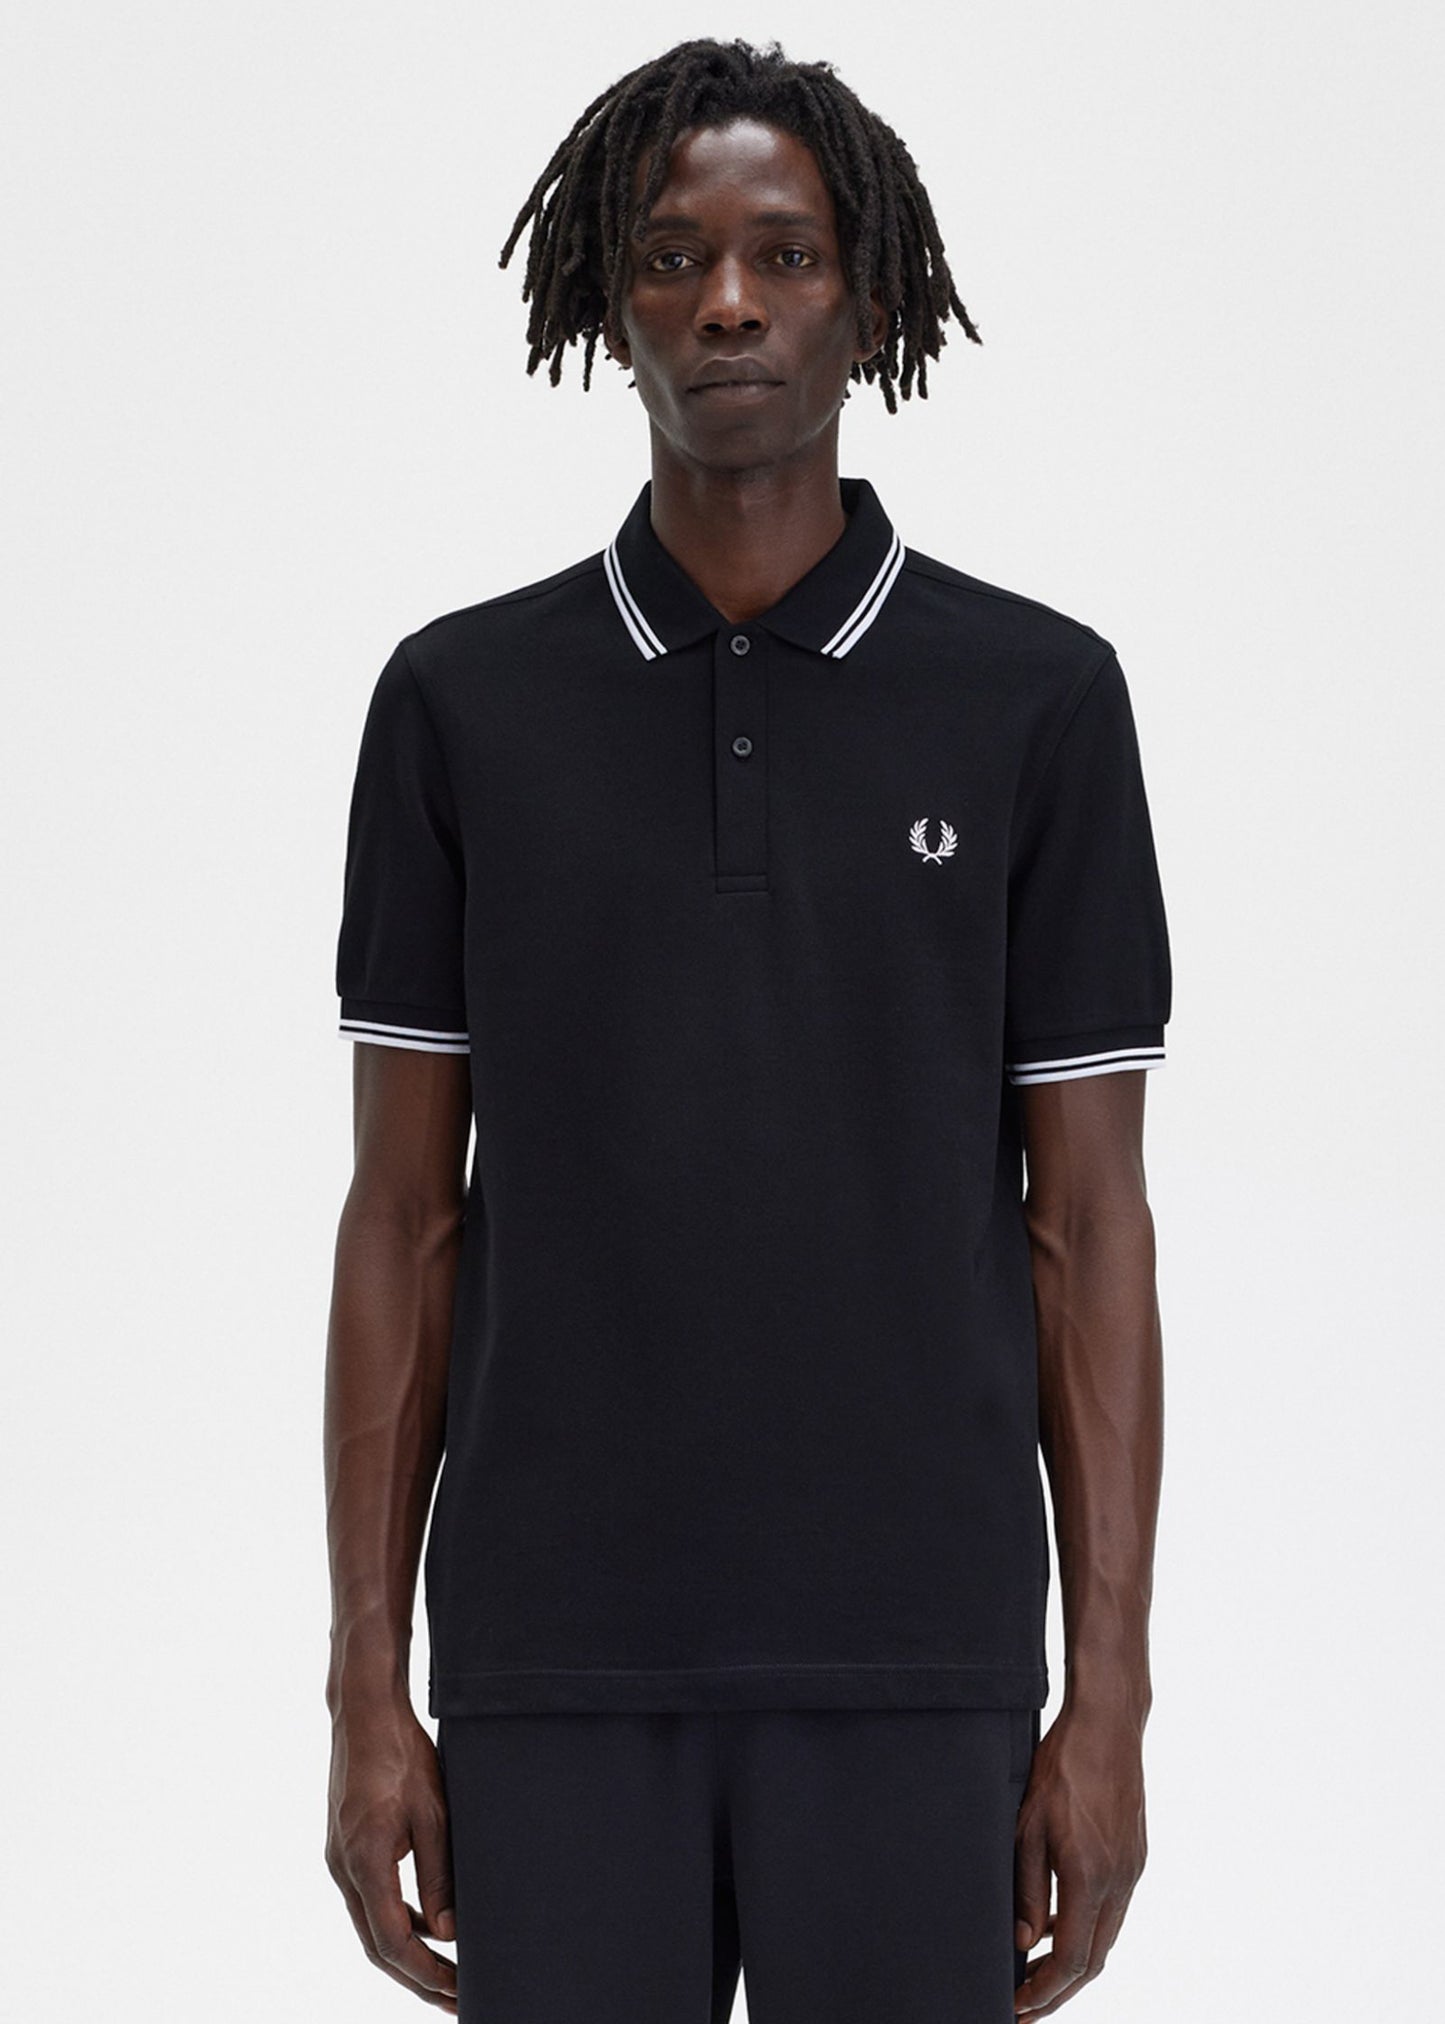 Twin tipped fred perry shirt - black white white